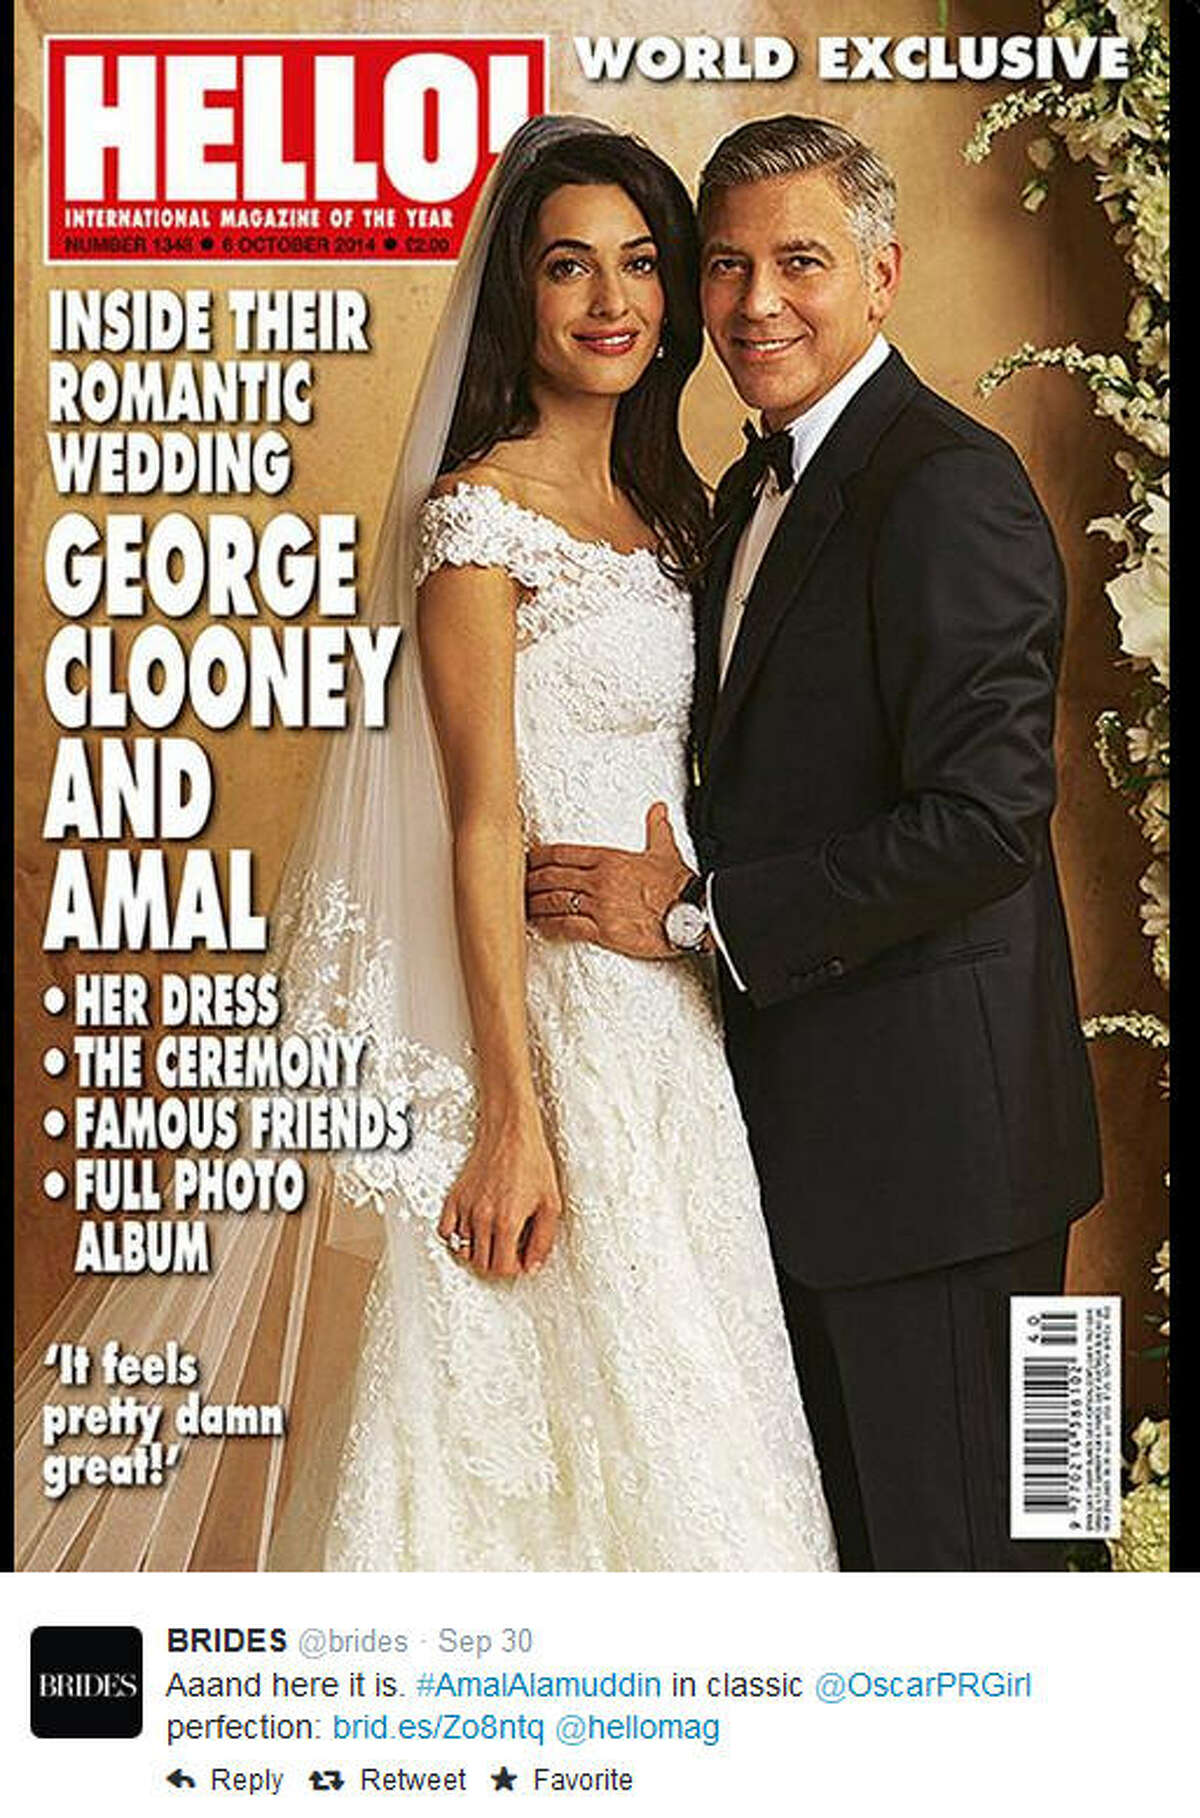 Brides around the world are feasting their eyes on the wedding dress Amal Alamuddin's wore to marry George Clooney on Sept. 27. Gorgeous as it is, she's not the only famous Mrs. with good taste. Take a look at what other stars said 'I do' in on their big day.